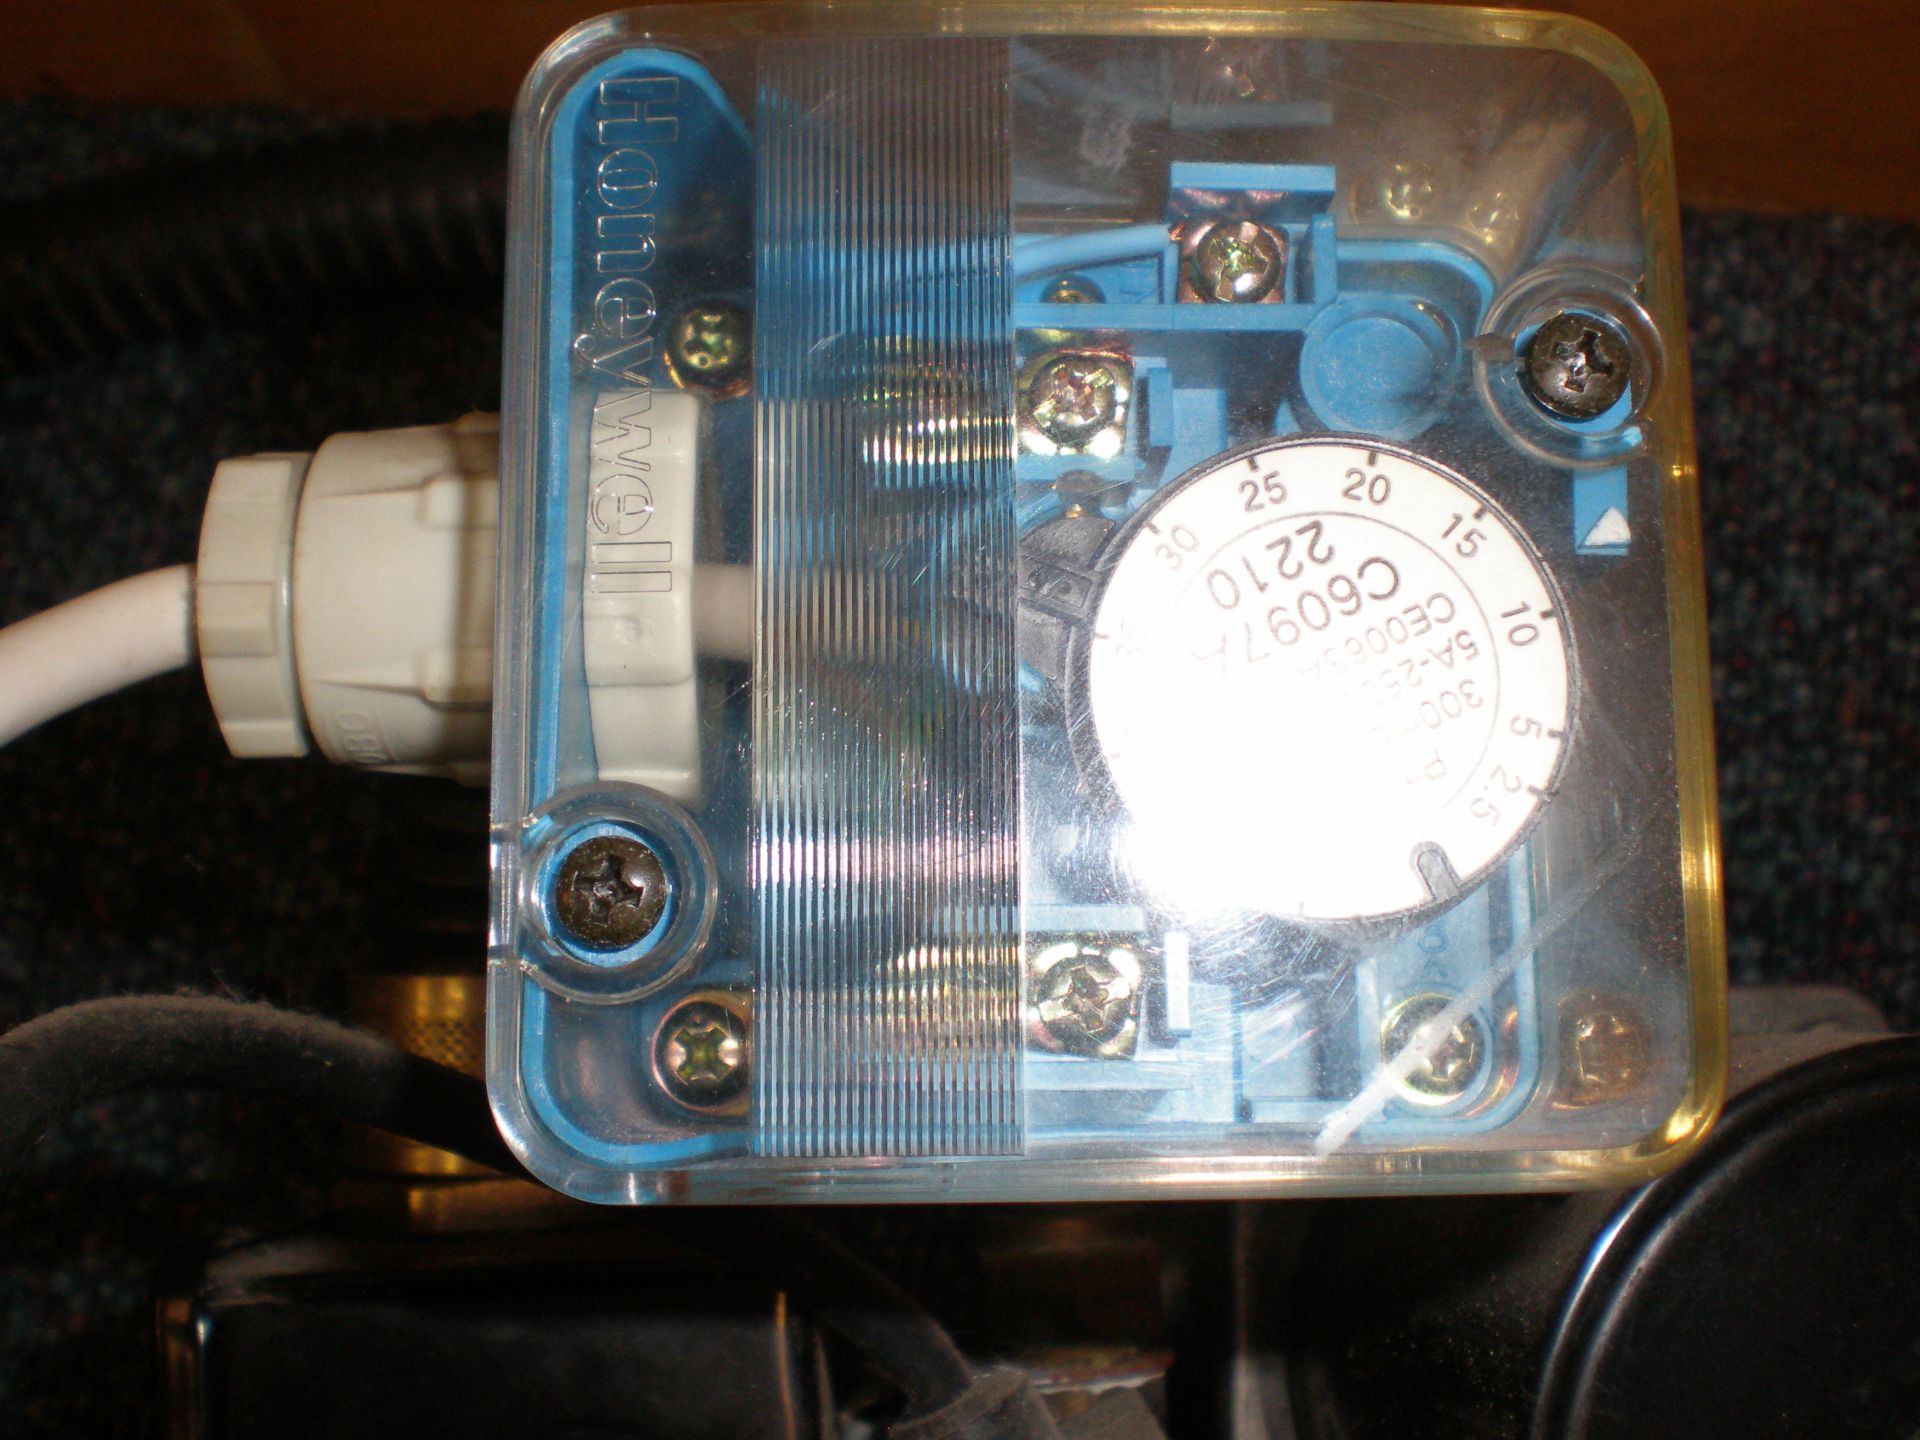 Honeywell Universal Gas Valves Ip54 200 Mbar Max Made In Italy Electronic Gas Valve Used To Cut - Image 6 of 9